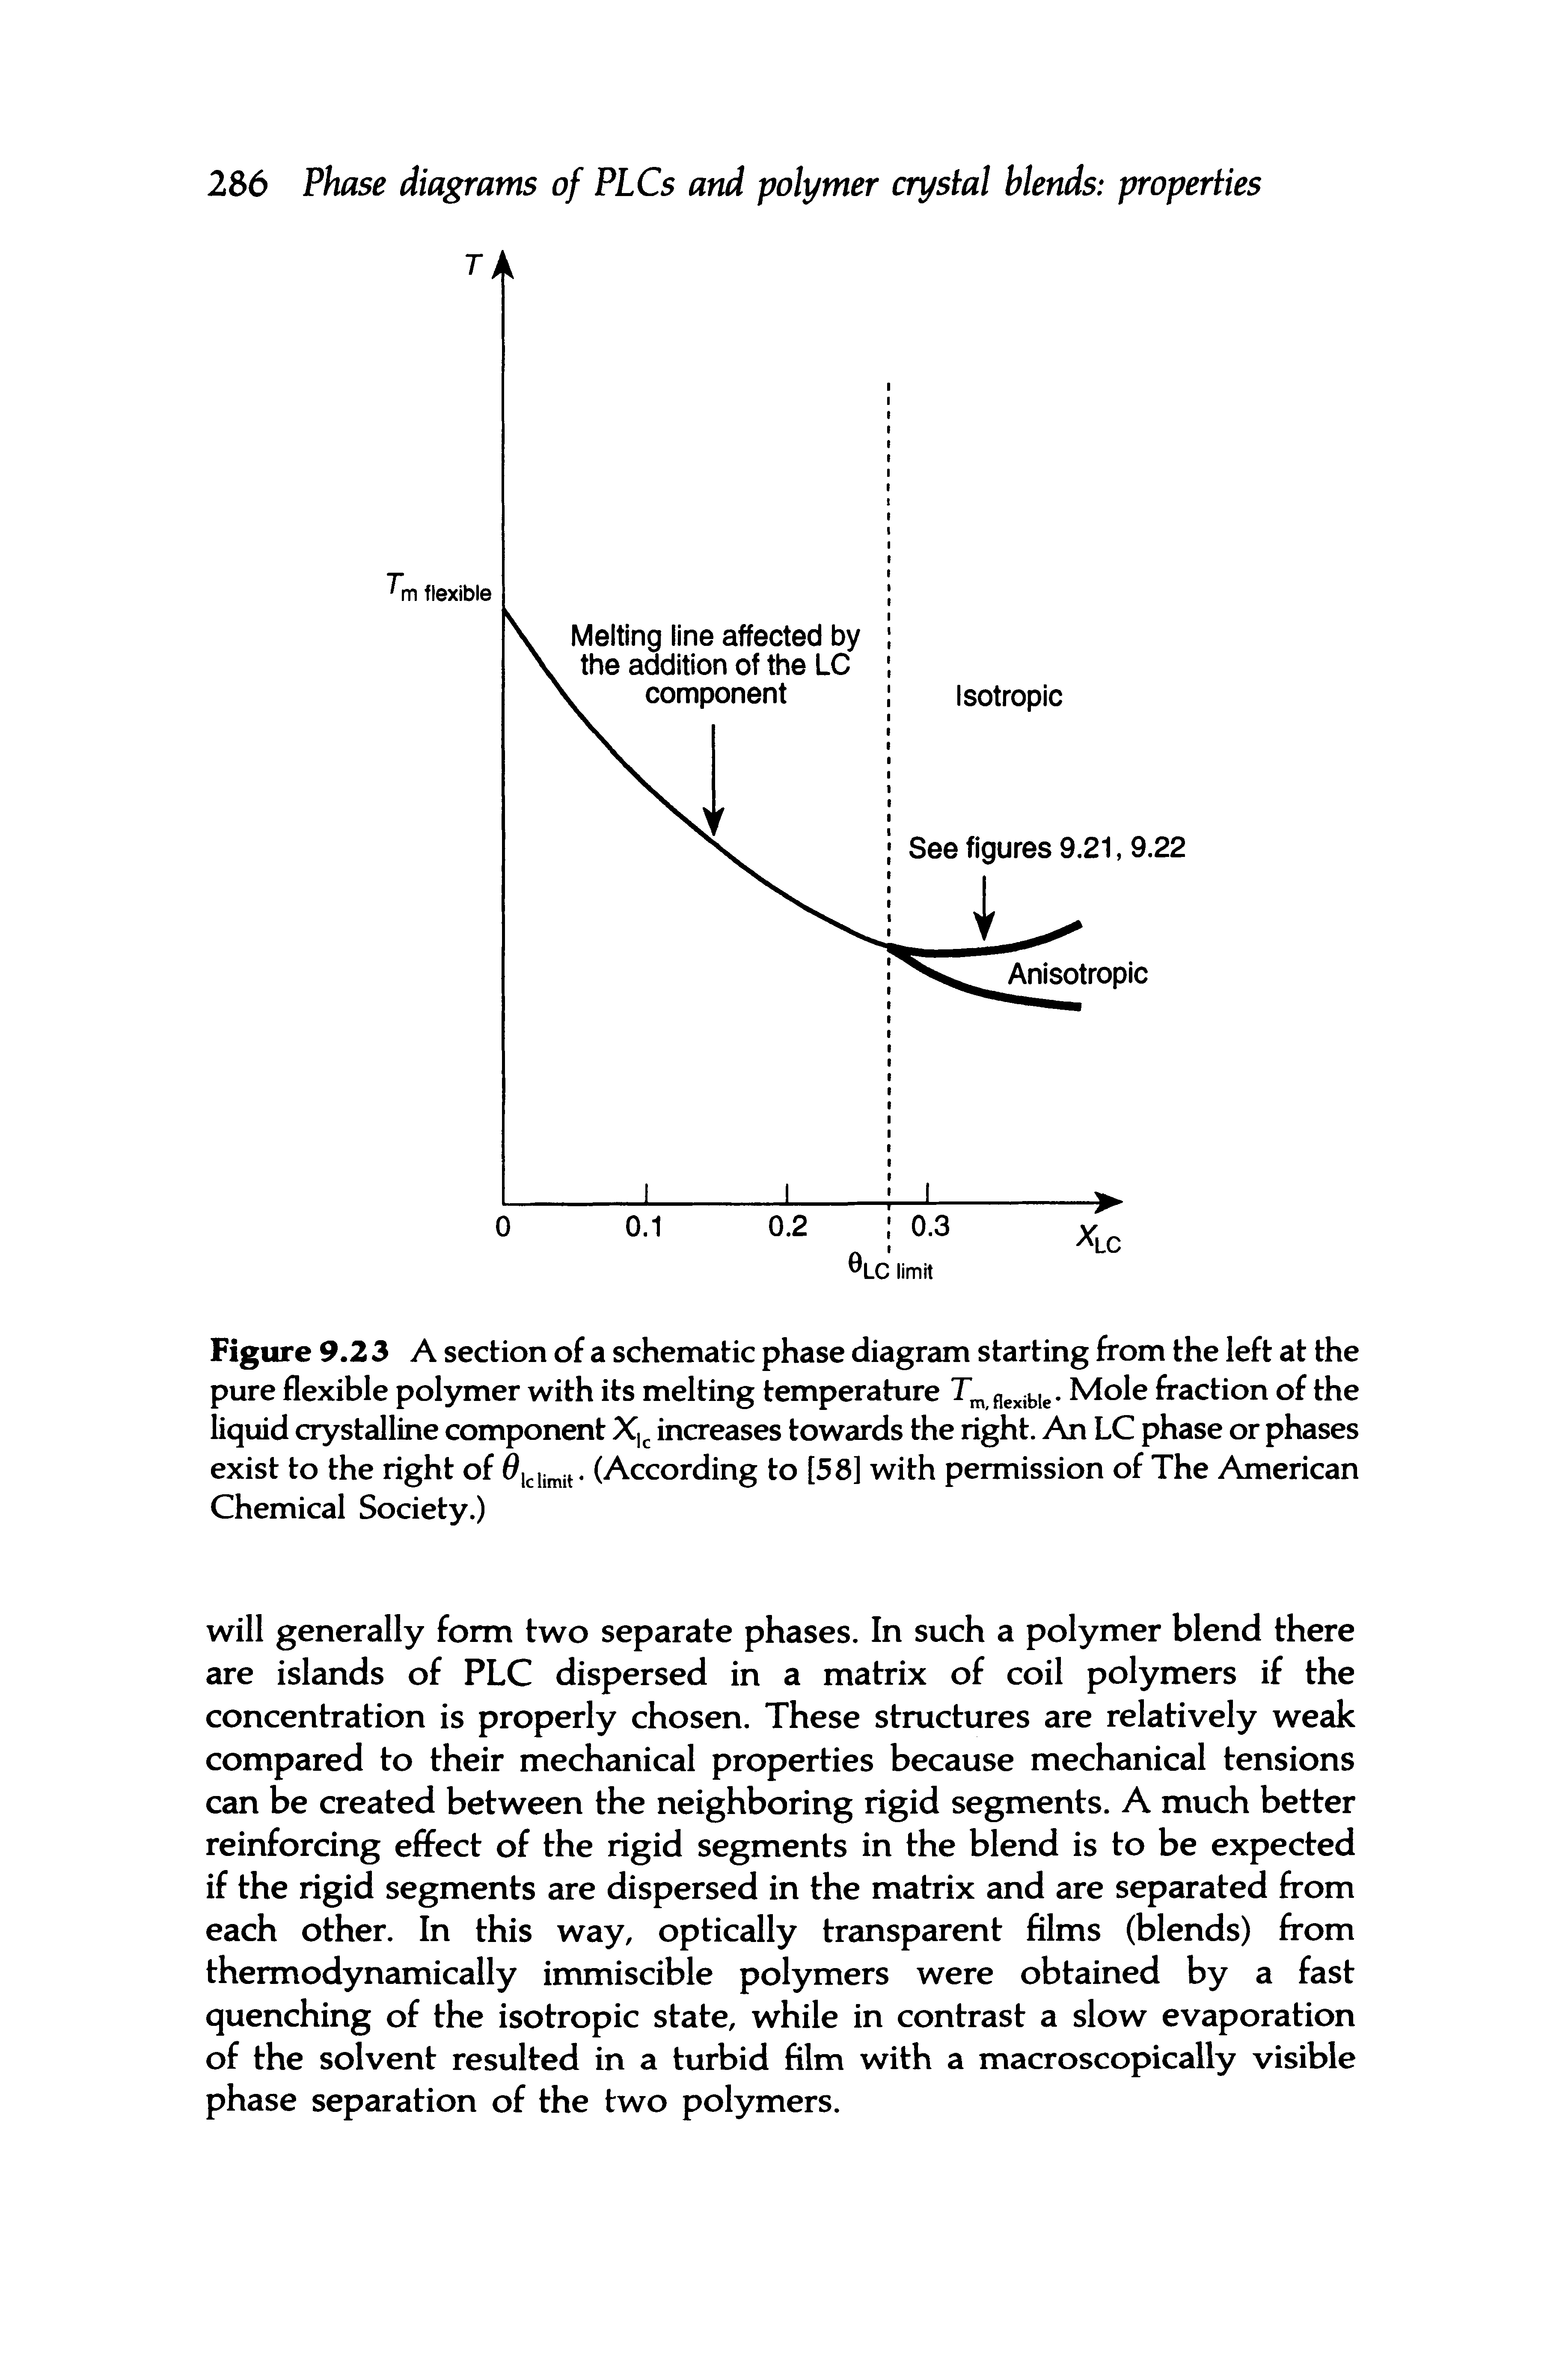 Figure 9.2 3 A section of a schematic phase diagram starting from the left at the pure flexible polymer with its melting temperature flexible- Mole fraction of the liquid crystalline component X. increases towards the right. An LC phase or phases exist to the right of flicUmif (According to [58] with permission of The American Chemical Society.)...